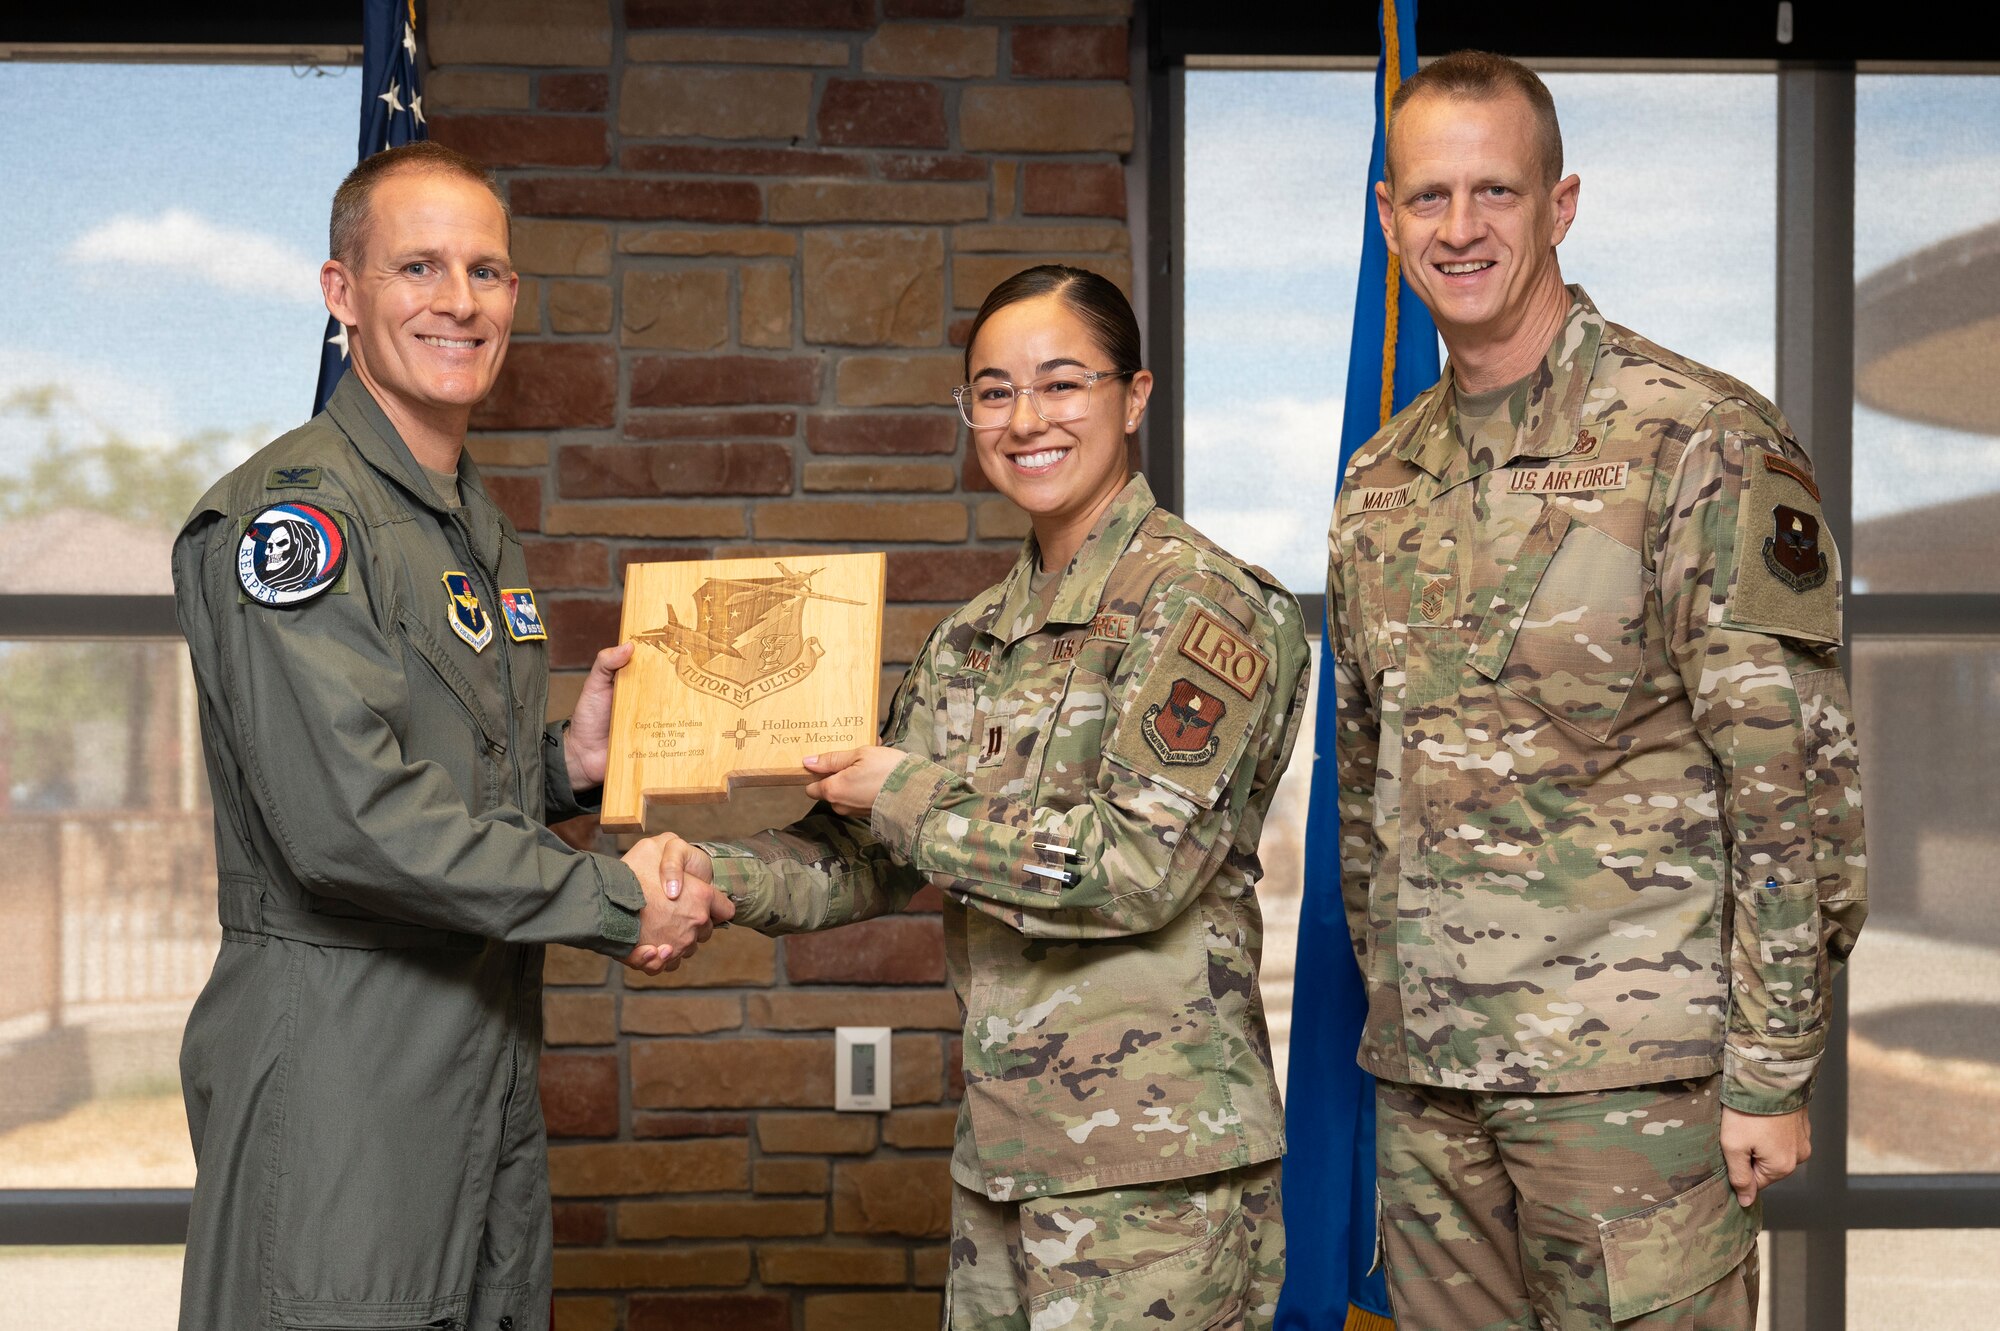 U.S. Air Force Capt. Cherae Medina, from the 49th Logistics Readiness Squadron, accepts the 49th Wing Company Grade Officer of the Quarter Award, during the 49th Wing’s 2nd Quarter Award ceremony at Holloman Air Force Base, New Mexico, Aug. 11, 2023. Quarterly award winners were selected based on their technical expertise, demonstration of leadership and job performance. (U.S. Air Force photo by Airman 1st Class Michelle Ferrari)